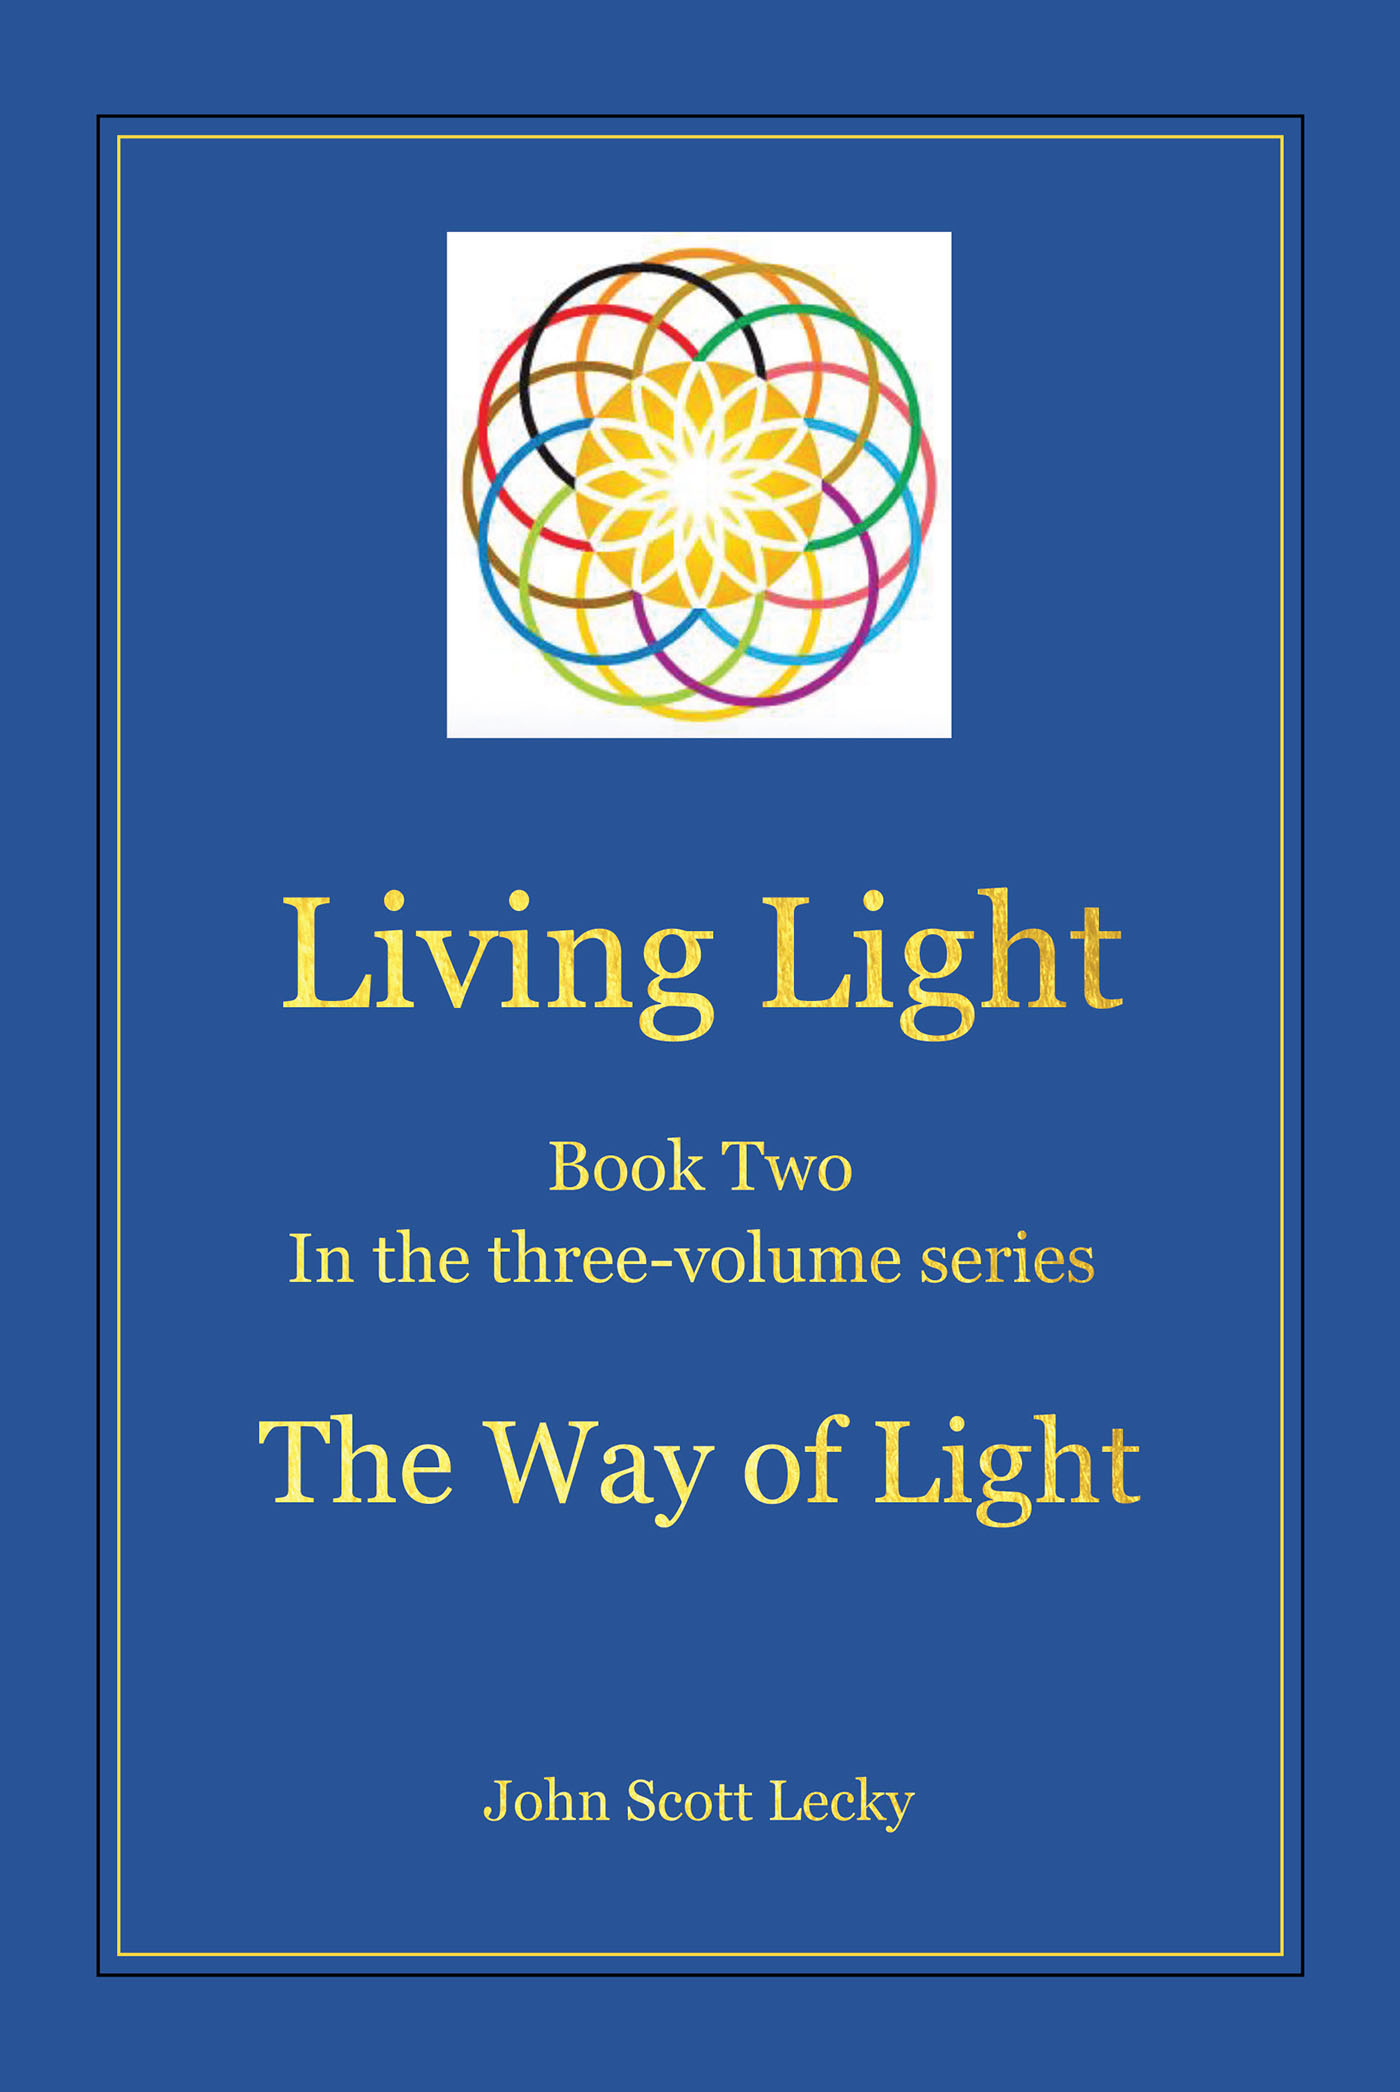 Author John Scott Lecky’s New Book “Living Light Book Two In the three-volume series: The Way of Light” is a Moving Memoir That Shares the Stories of Several Individuals